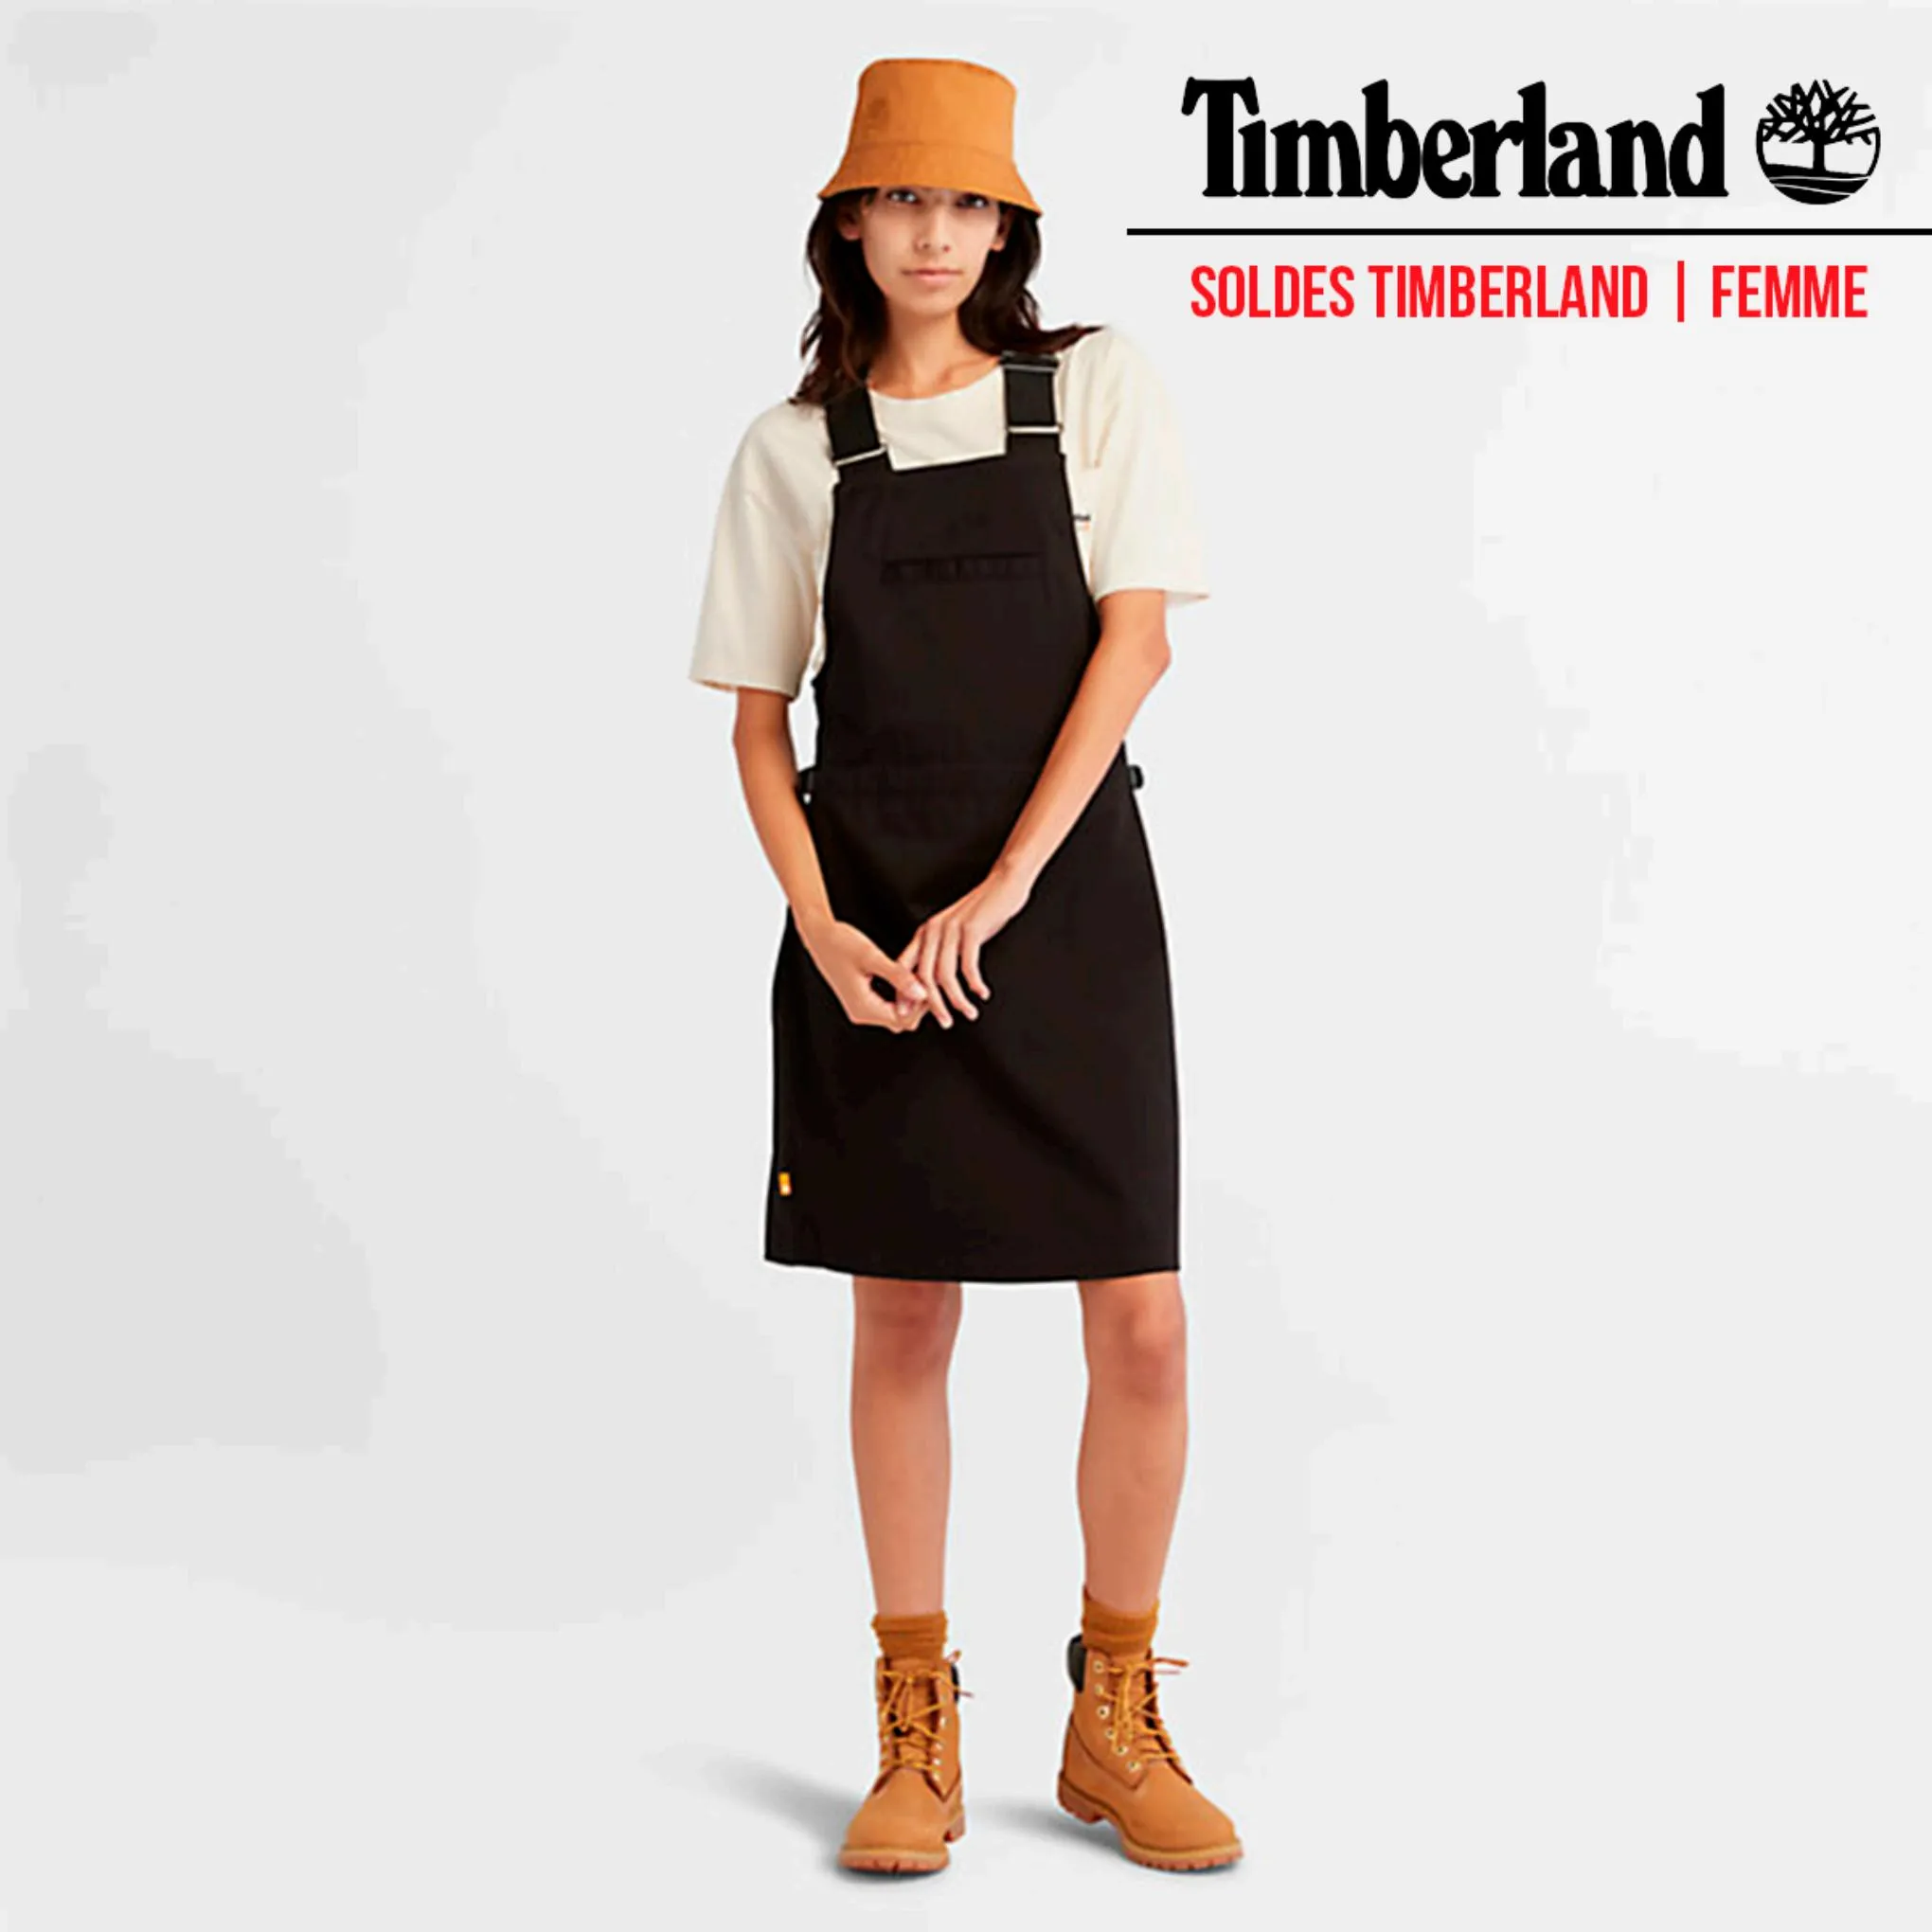 Catalogue Soldes Timberland | Femme, page 00001